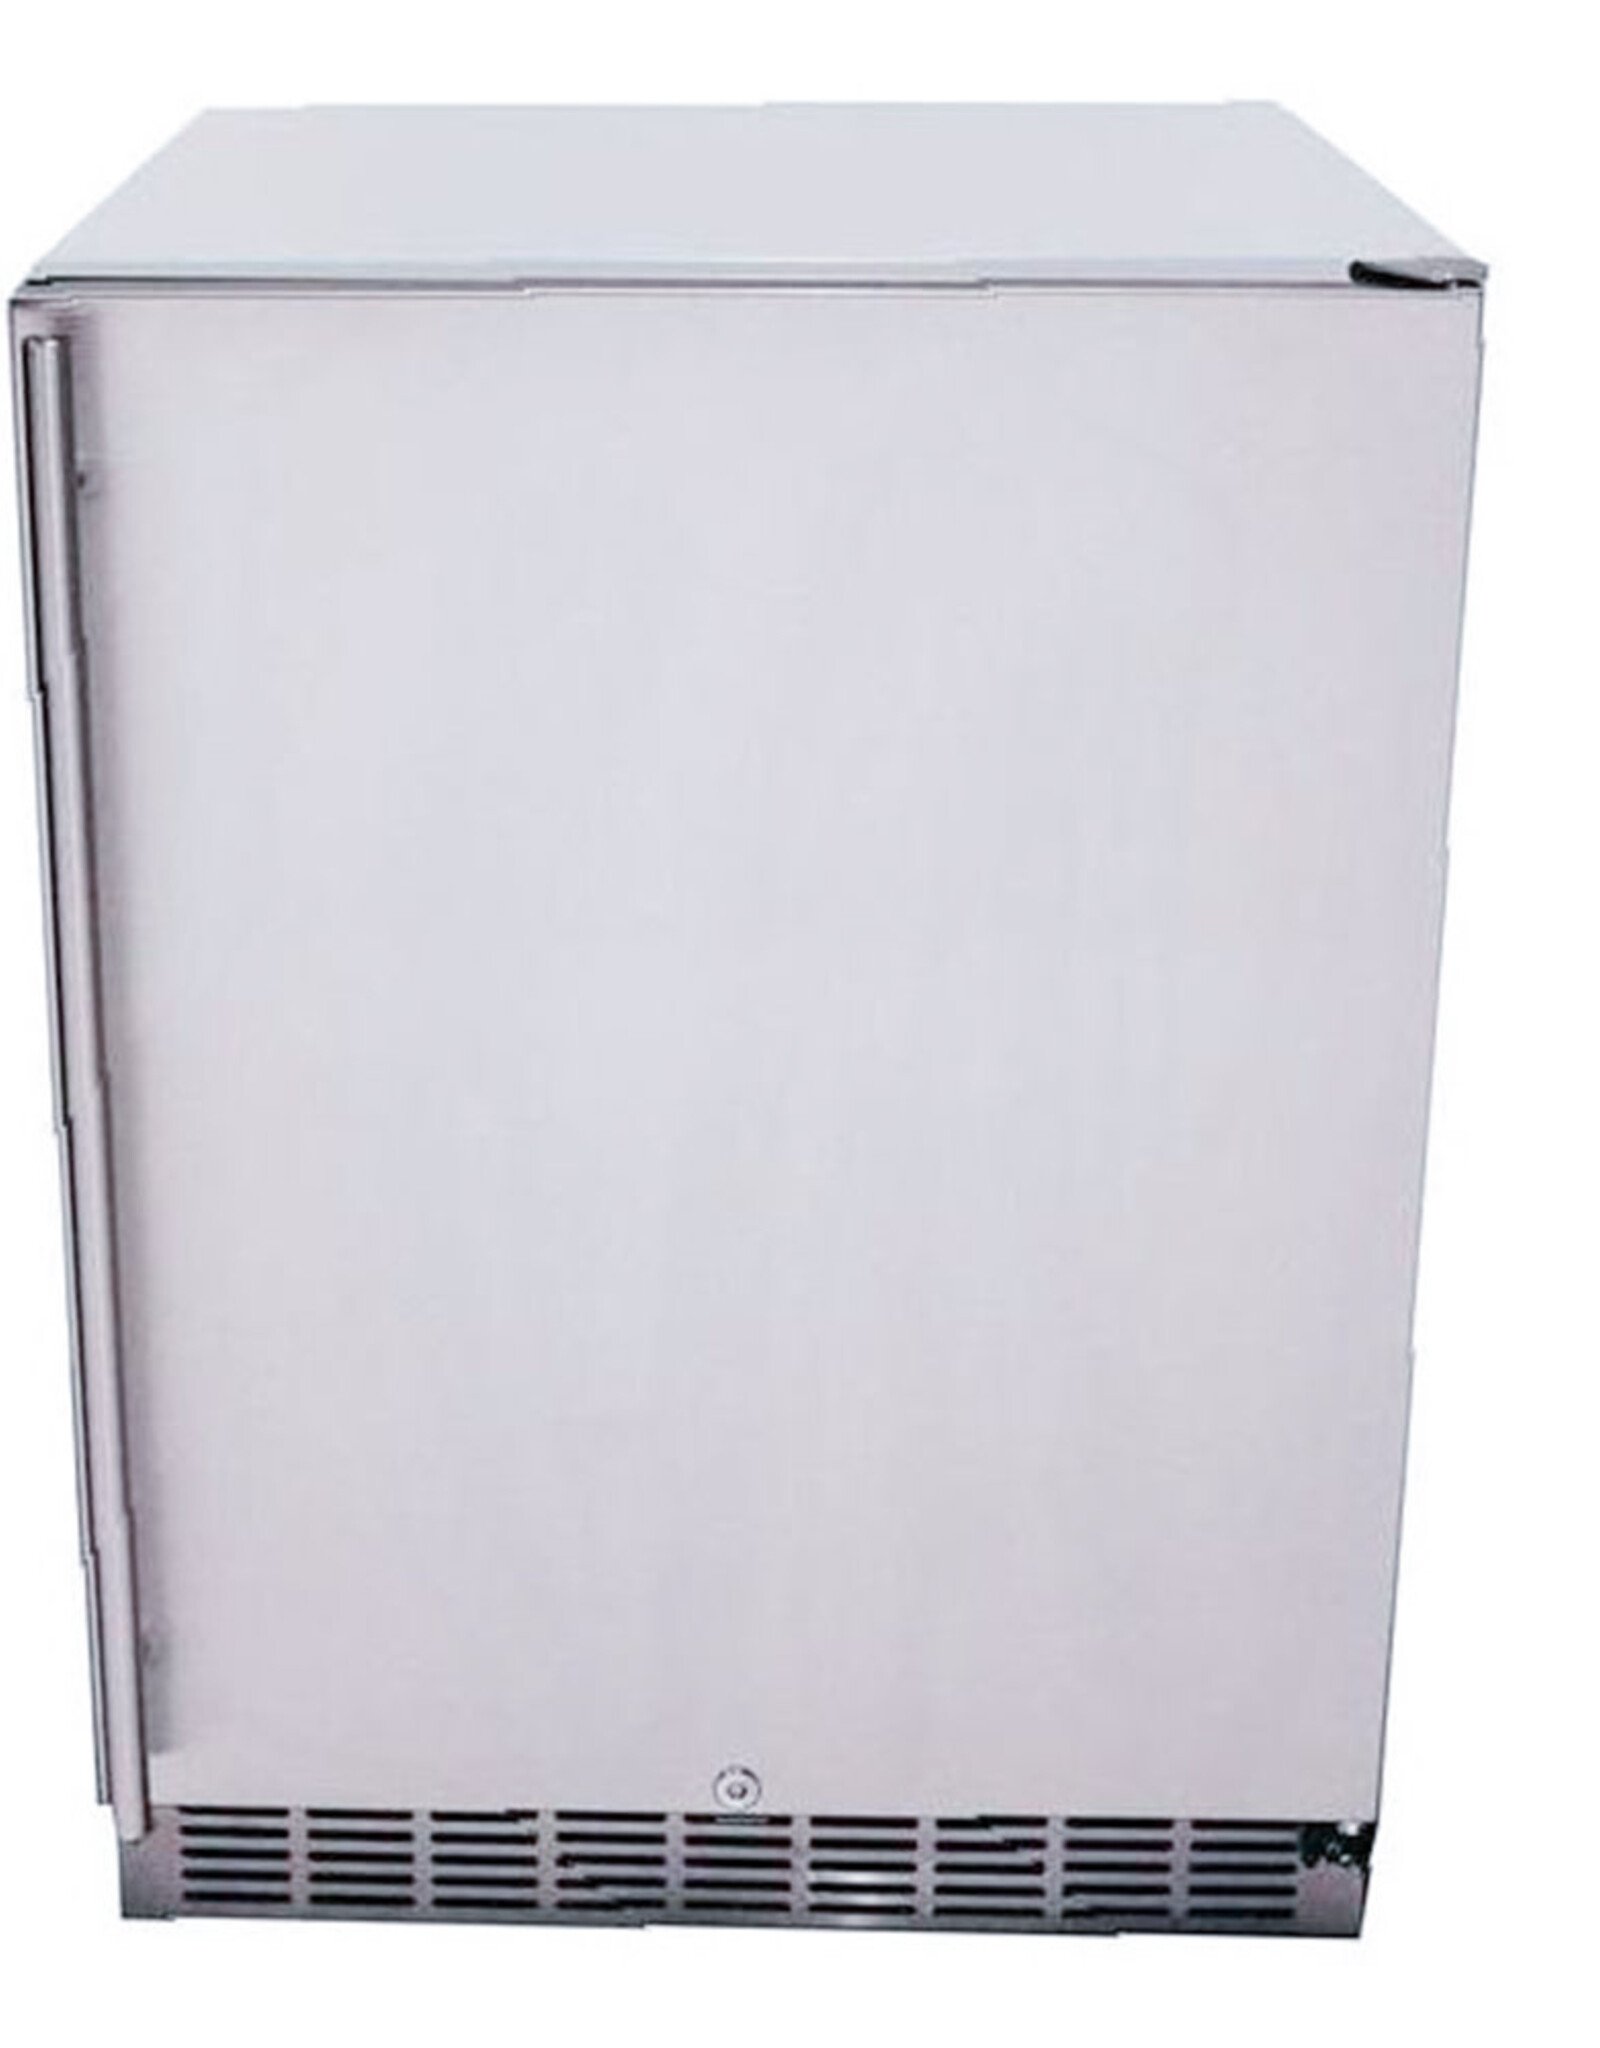 Renaissance Cooking Systems Renaissance Cooking Systems UL Rated Refrigerator - REFR2A